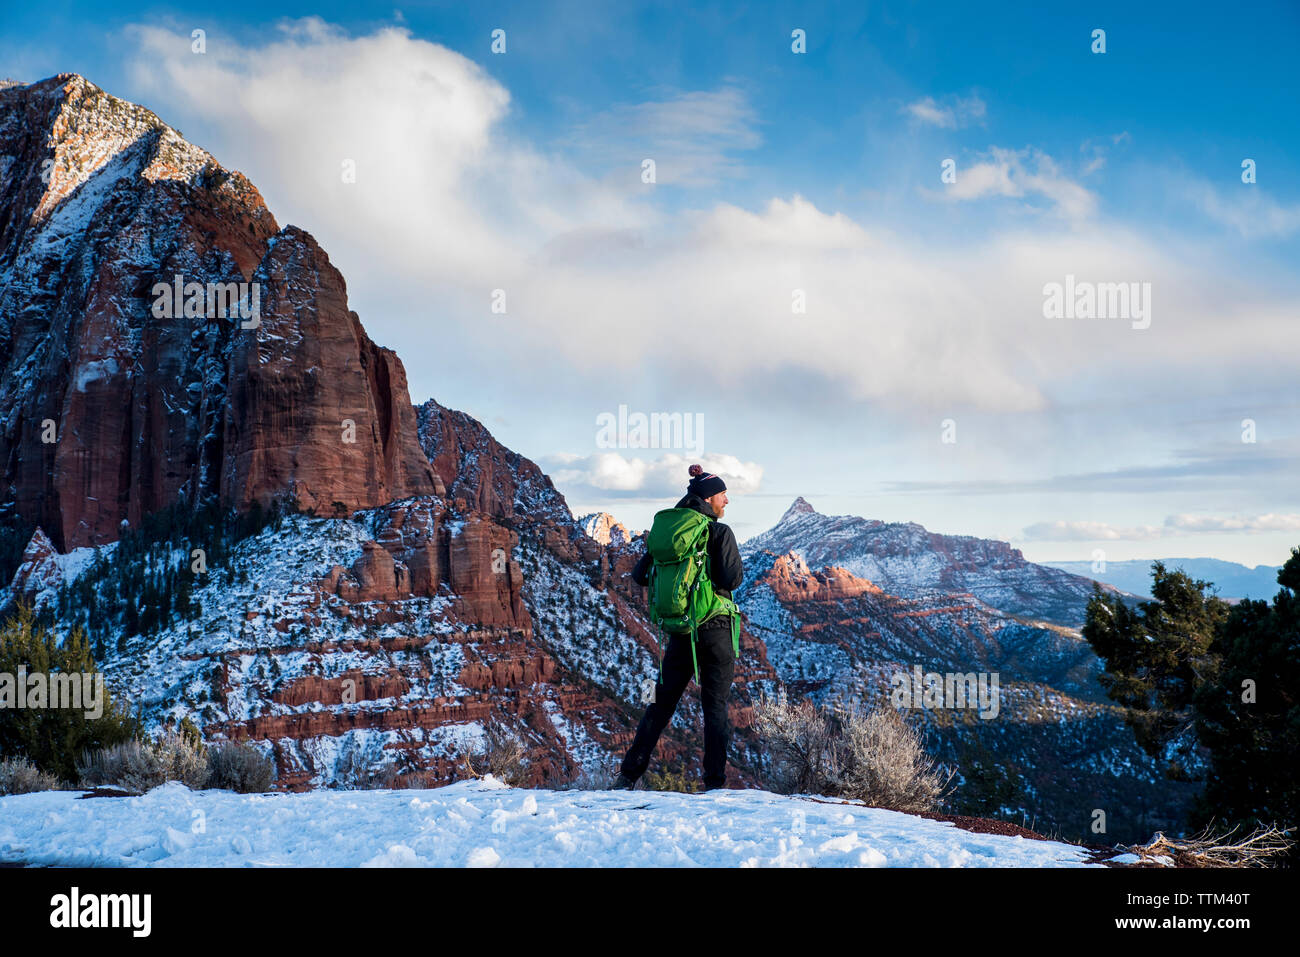 Rear view of man with green backpack standing on snow at desert against rock formations and cloudy sky during winter Stock Photo